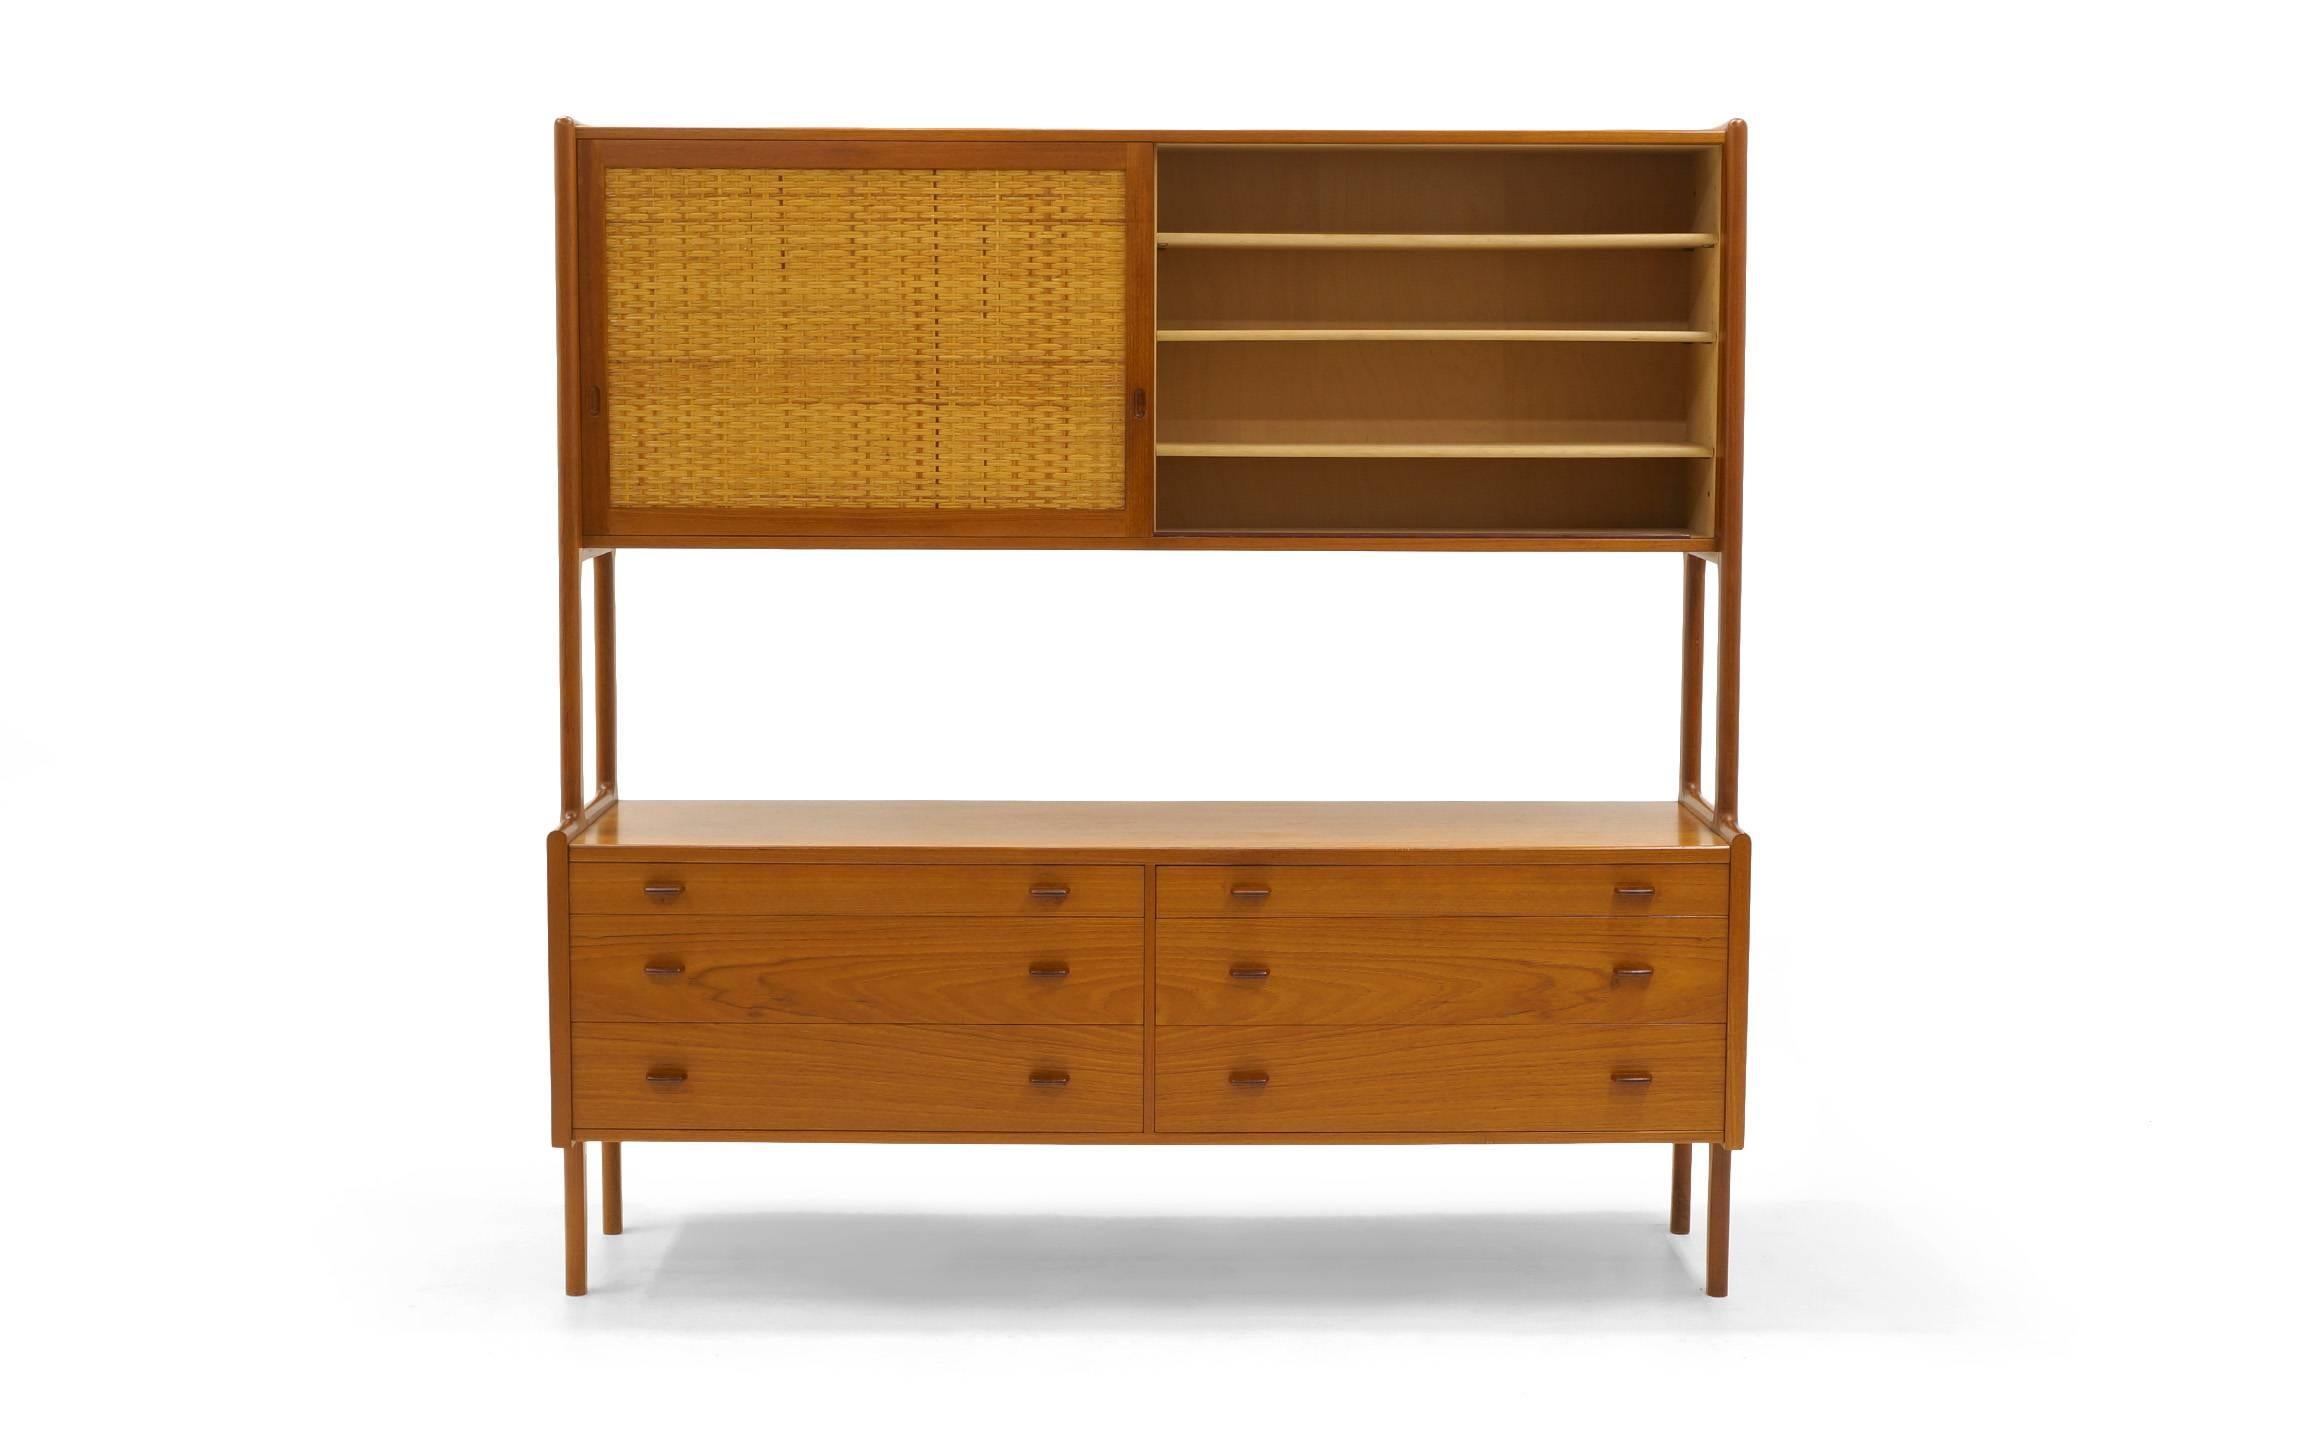 Excellent original condition Hans Wegner storage cabinet in teak. Sliding cane covered teak sliding doors on top reveal adjustable shelves (three on one side, two on the other). Top two drawers on lower portion have new felt lining. This unit is in